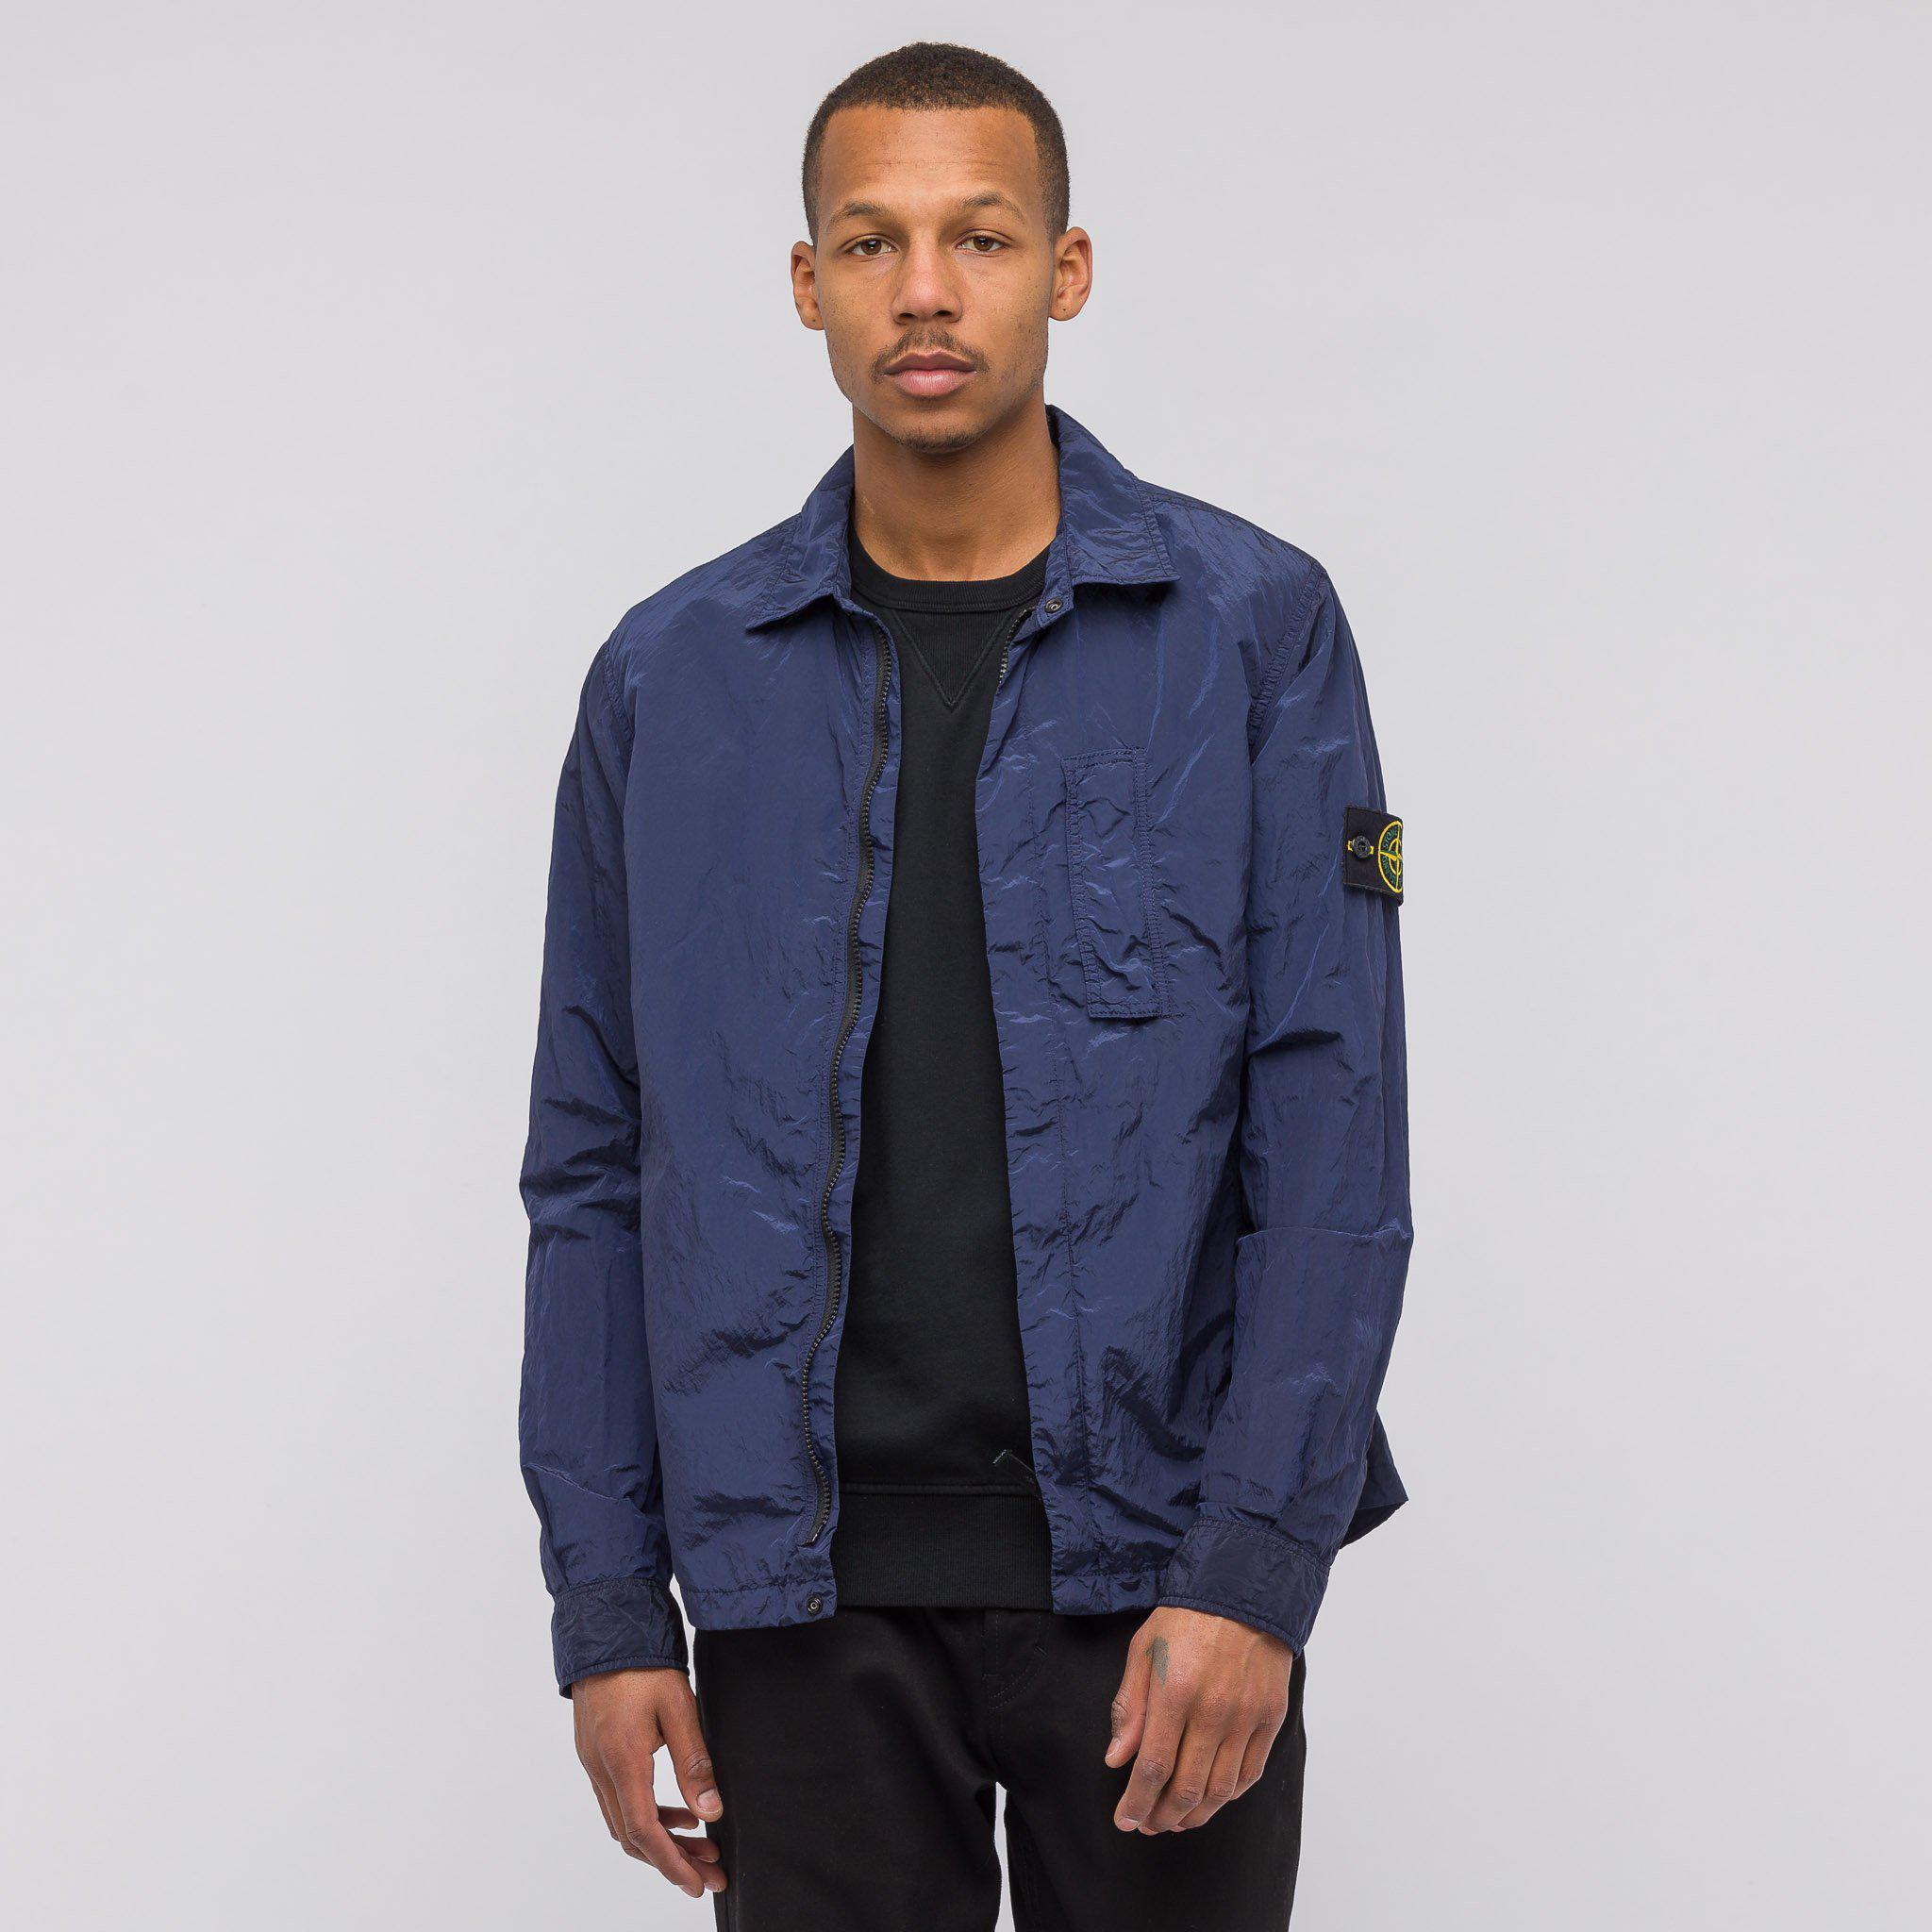 Stone Island Synthetic 10844 Shirt Jacket In Navy in Blue for Men - Lyst